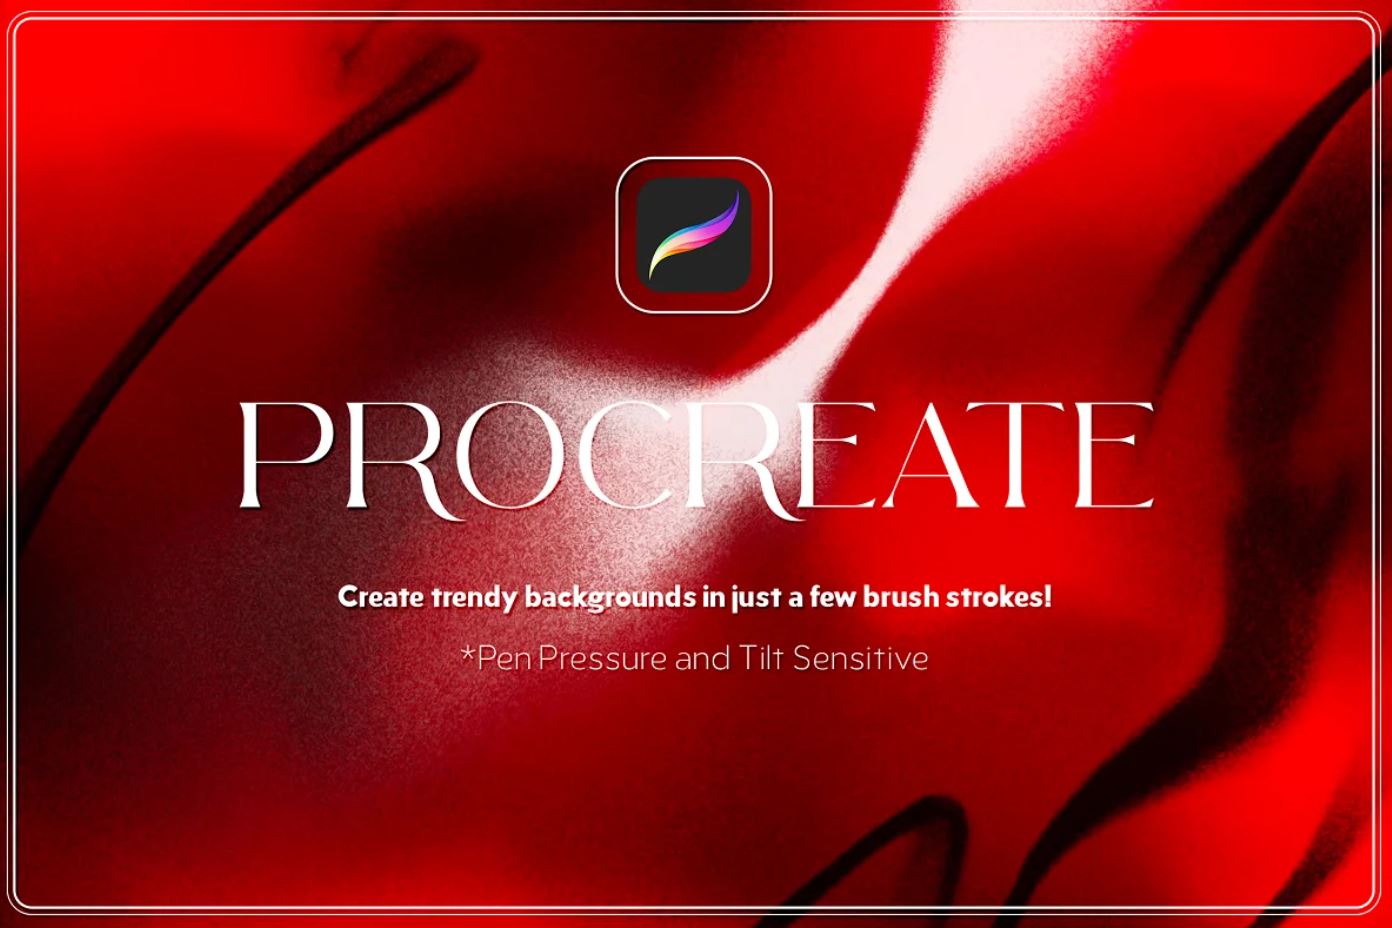 High quality grain procreate brushes to give a trendy look to your projects